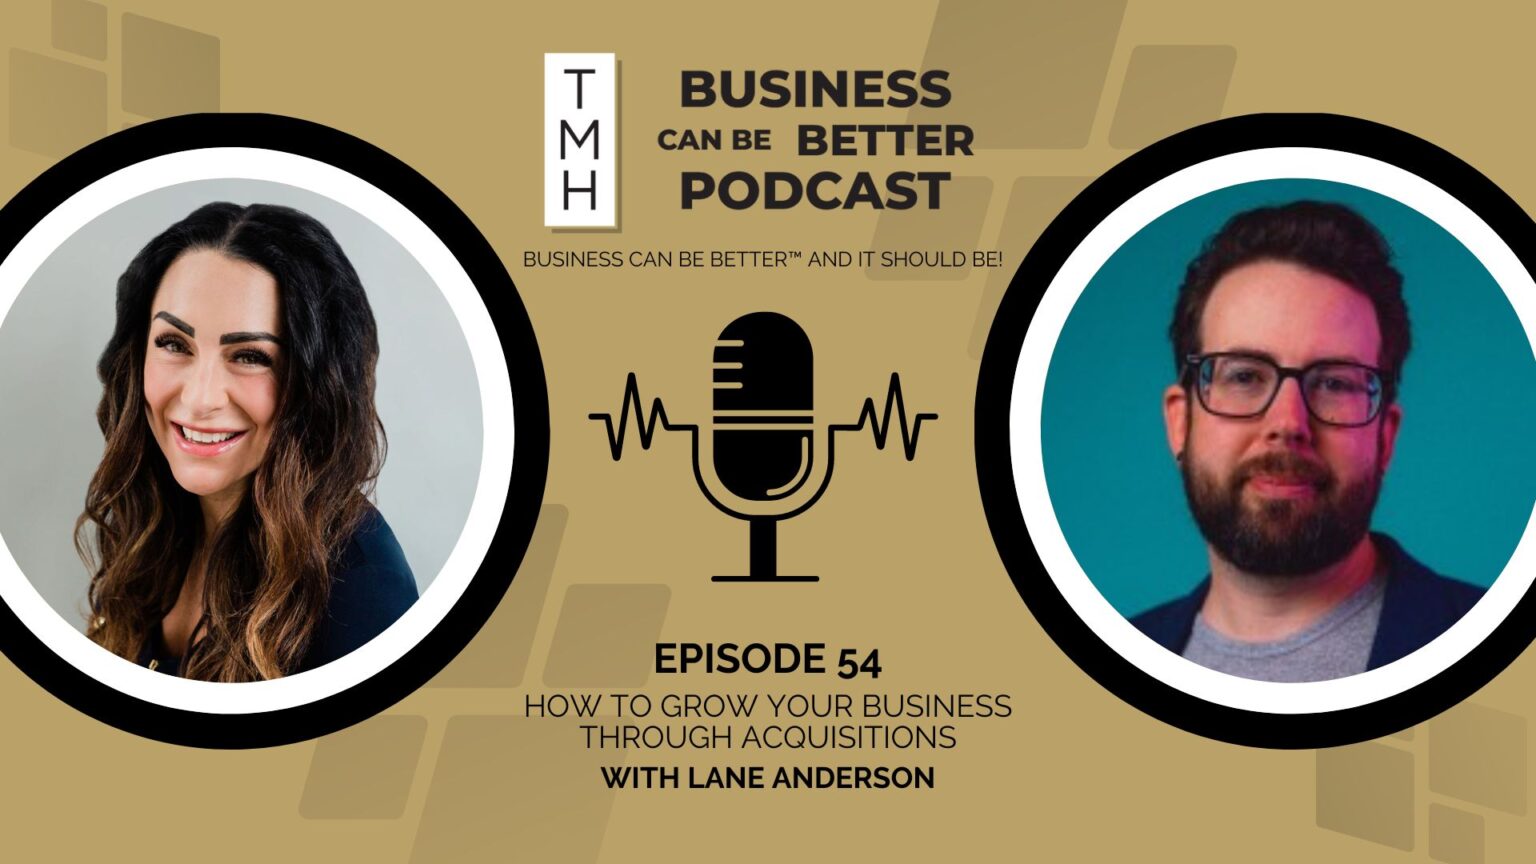 grow your business through acquisitions lane anderson